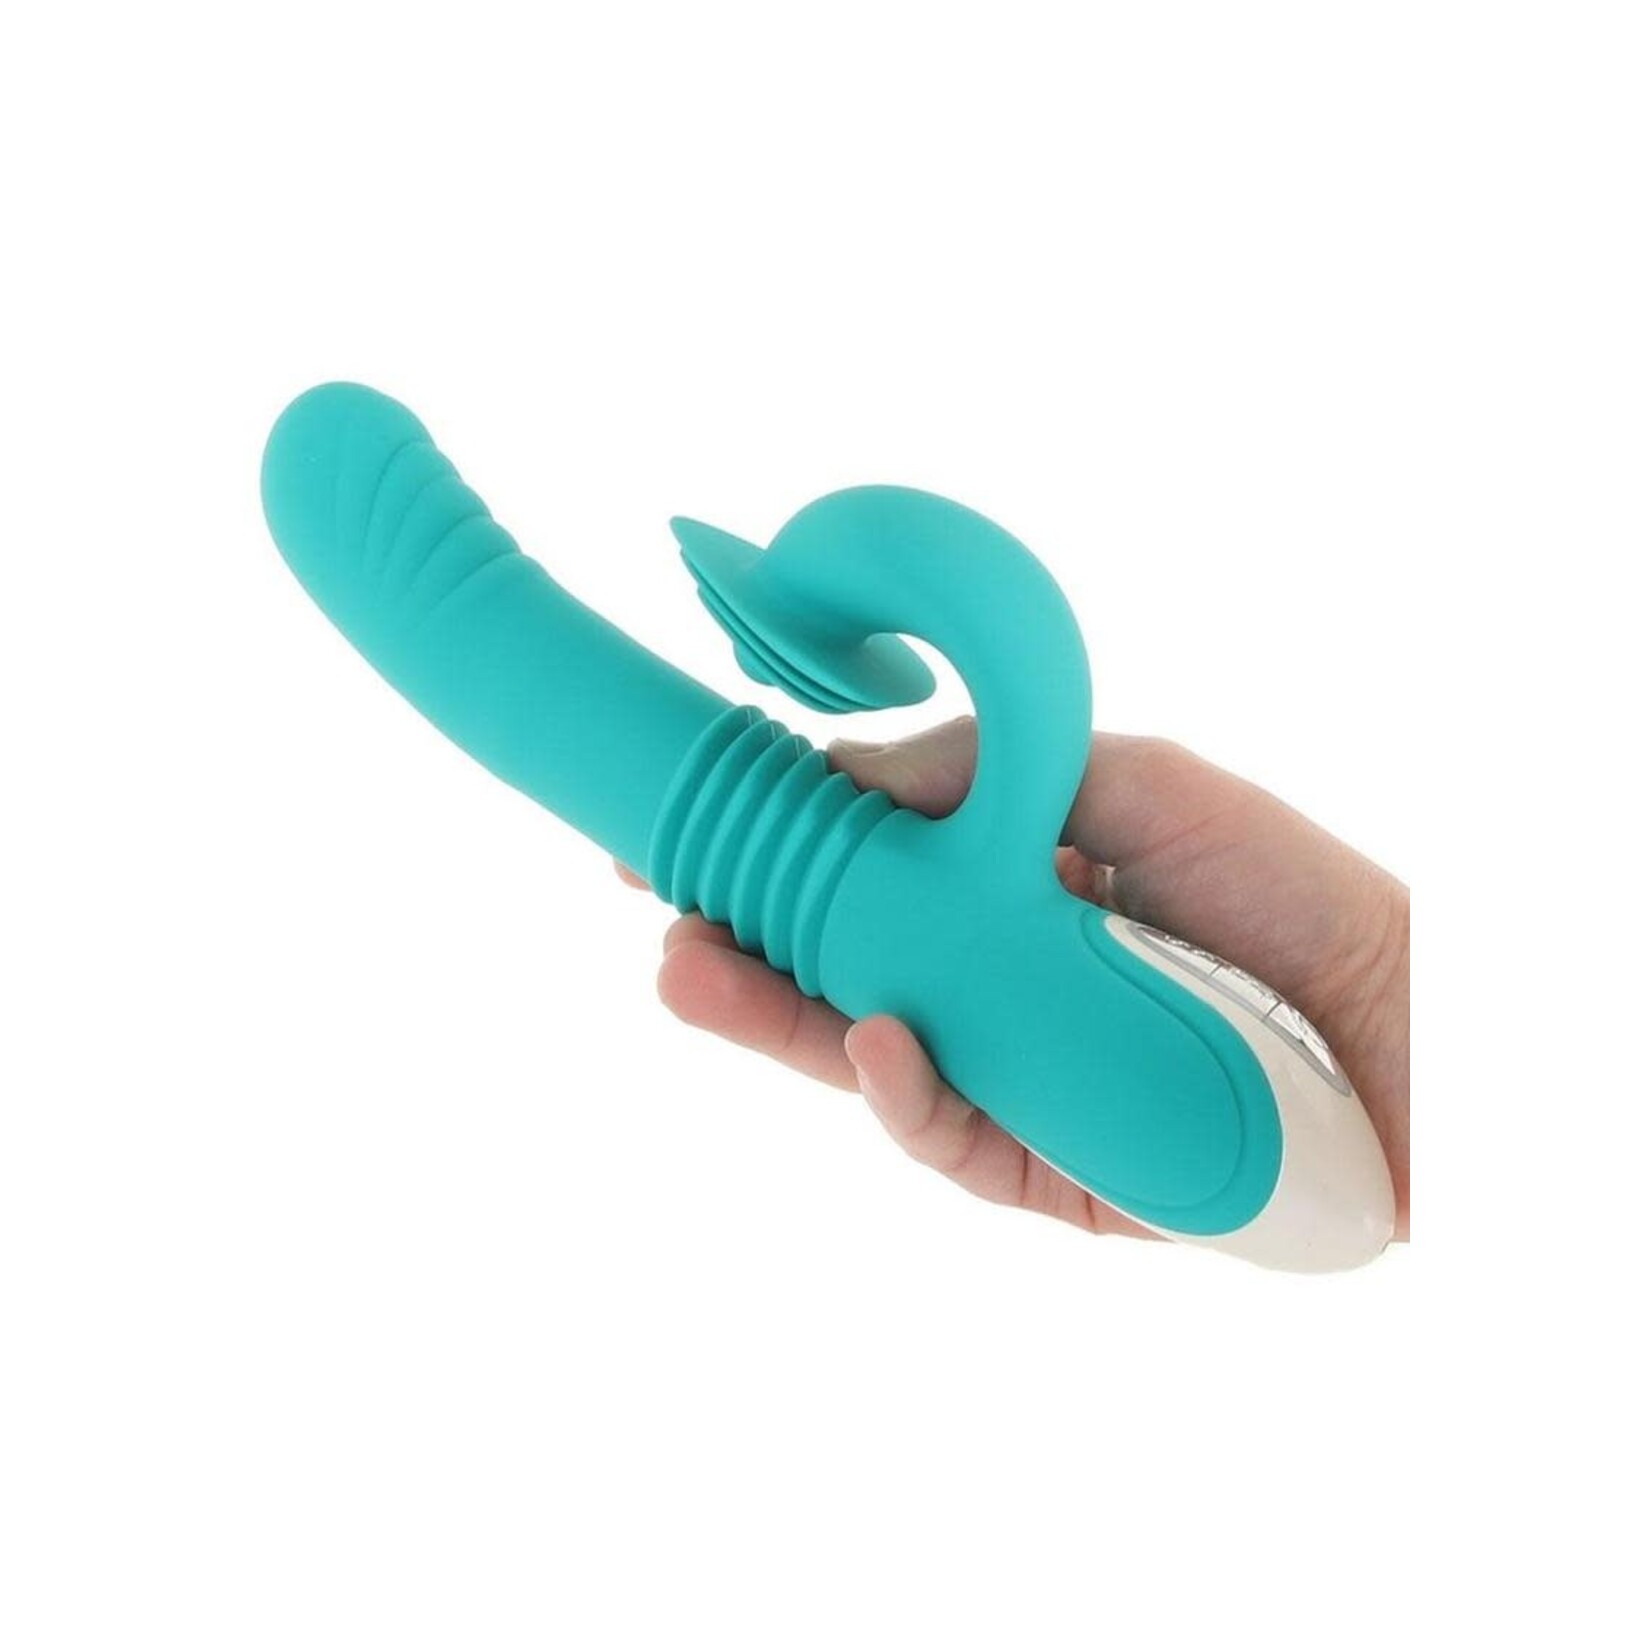 Show Stopper Rechargeable Silicone Dual Vibrator With Clitoral Stimulator - Teal